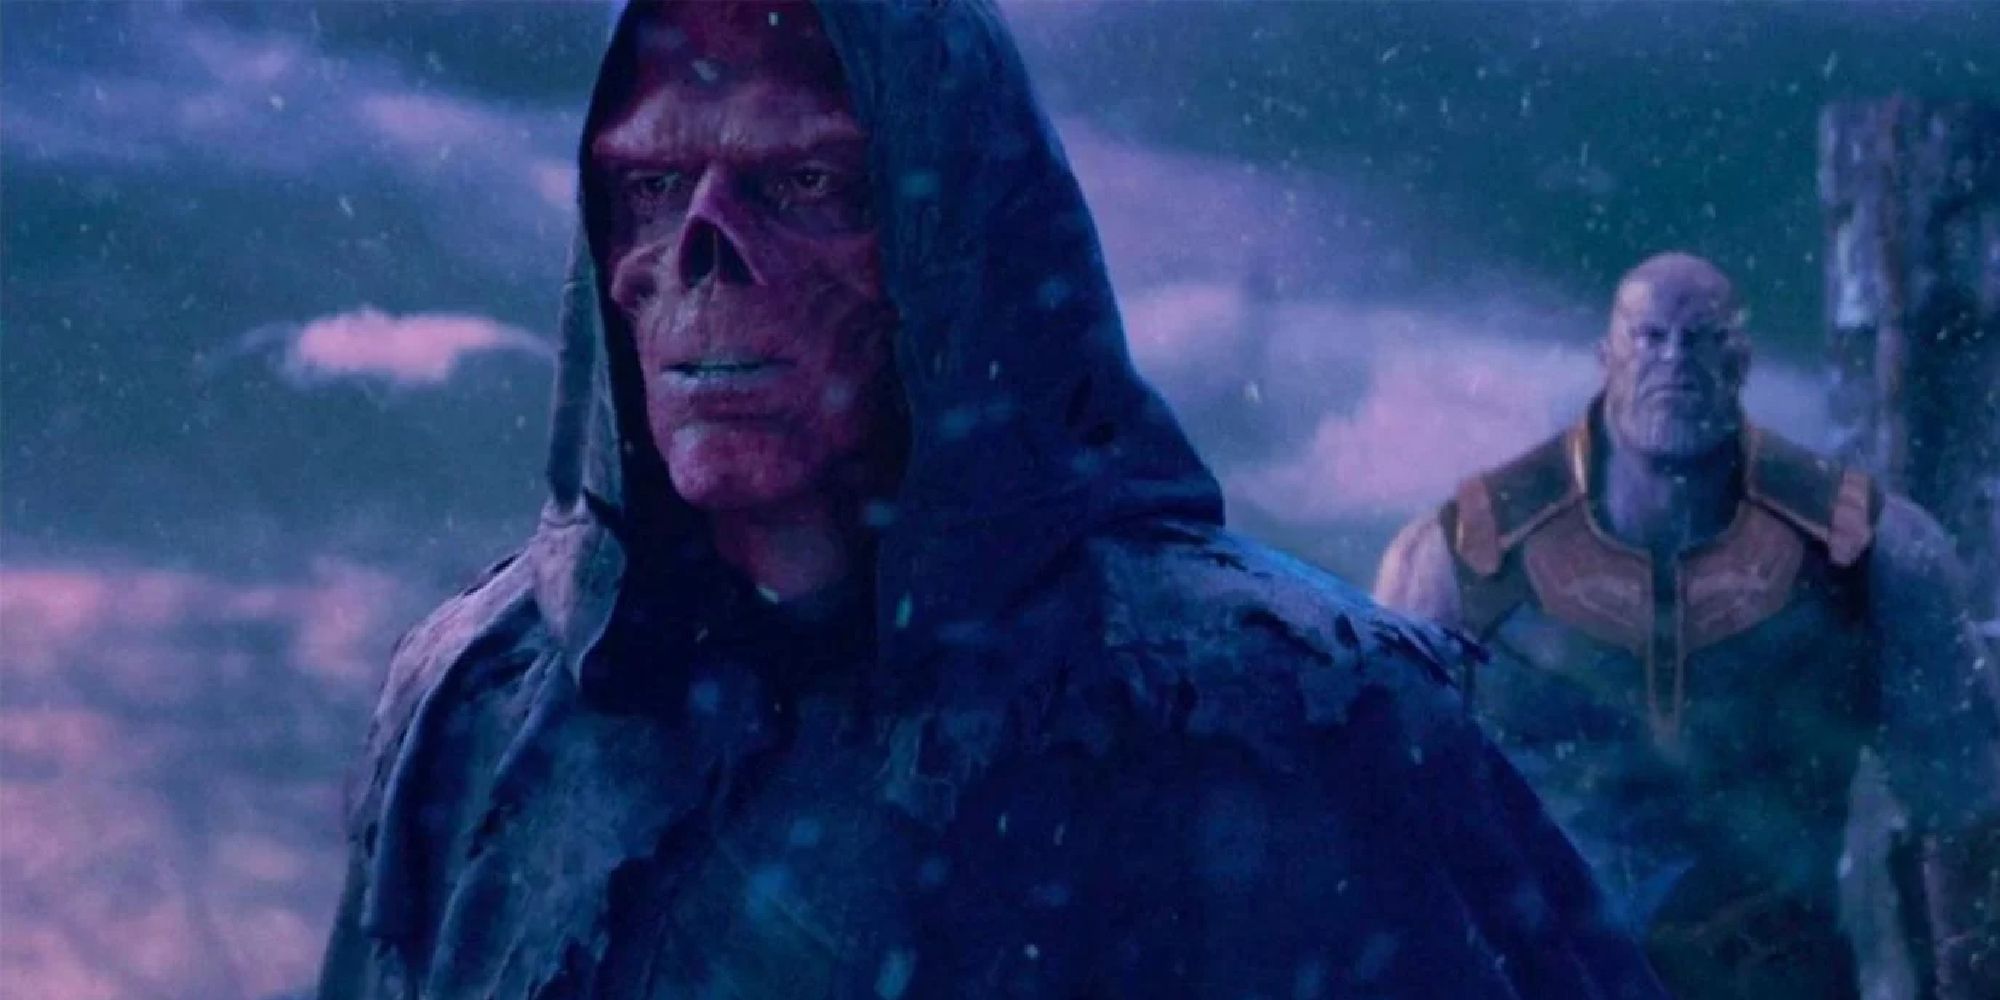 The Red Skull with his back turned on Thanos on Vormir in Infinity War